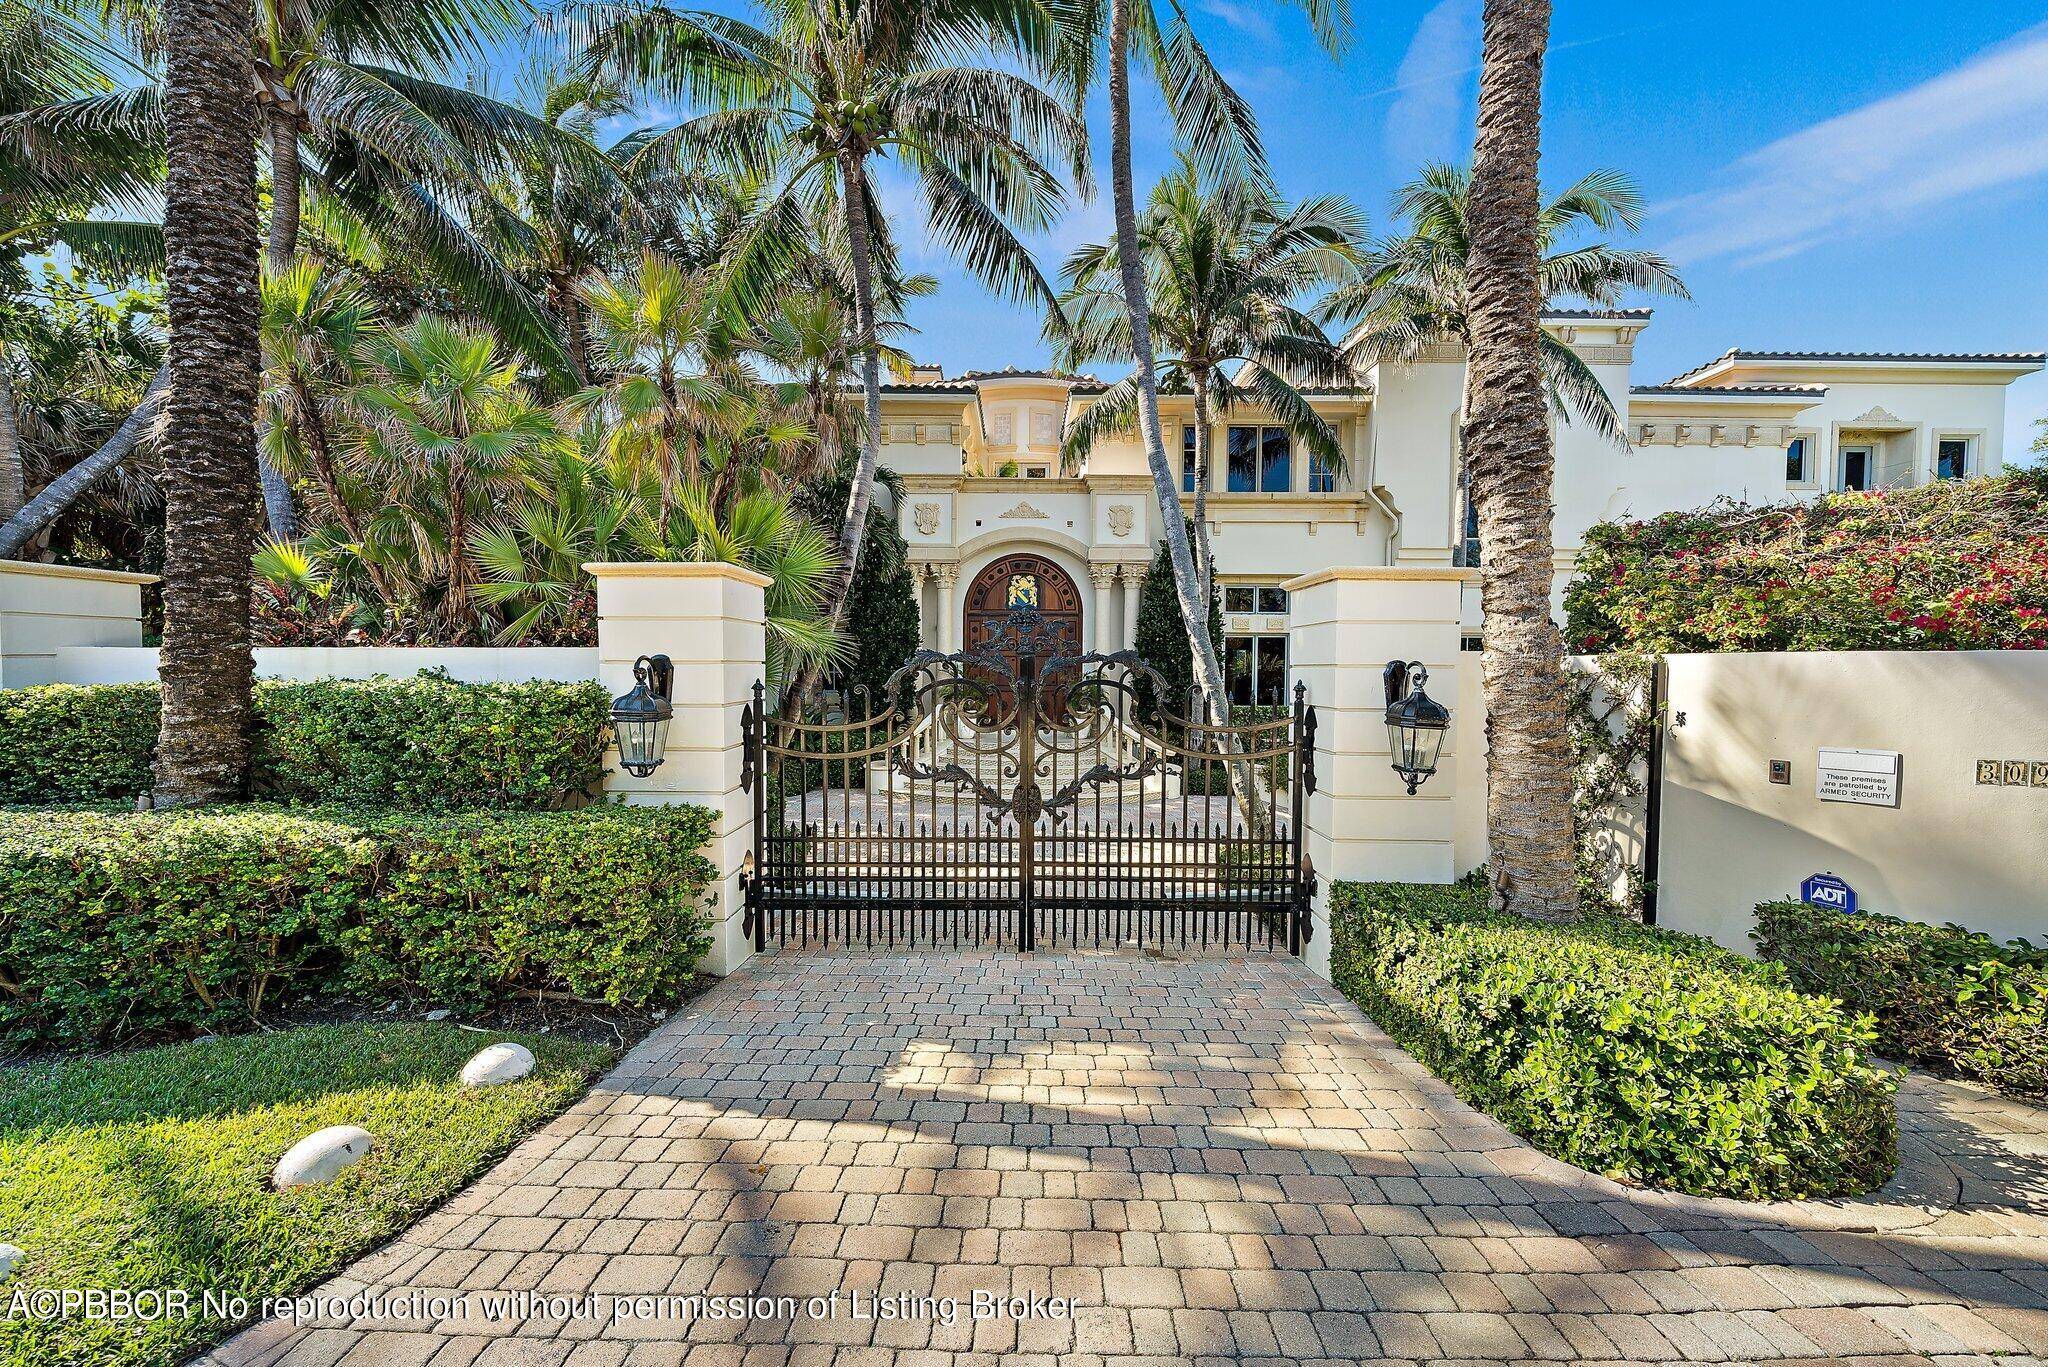 This spectacular custom estate is a fully furnished, luxurious oasis perched between the Intracoastal Waterway and the magnificent Atlantic Ocean, offering breathtaking vistas of both.